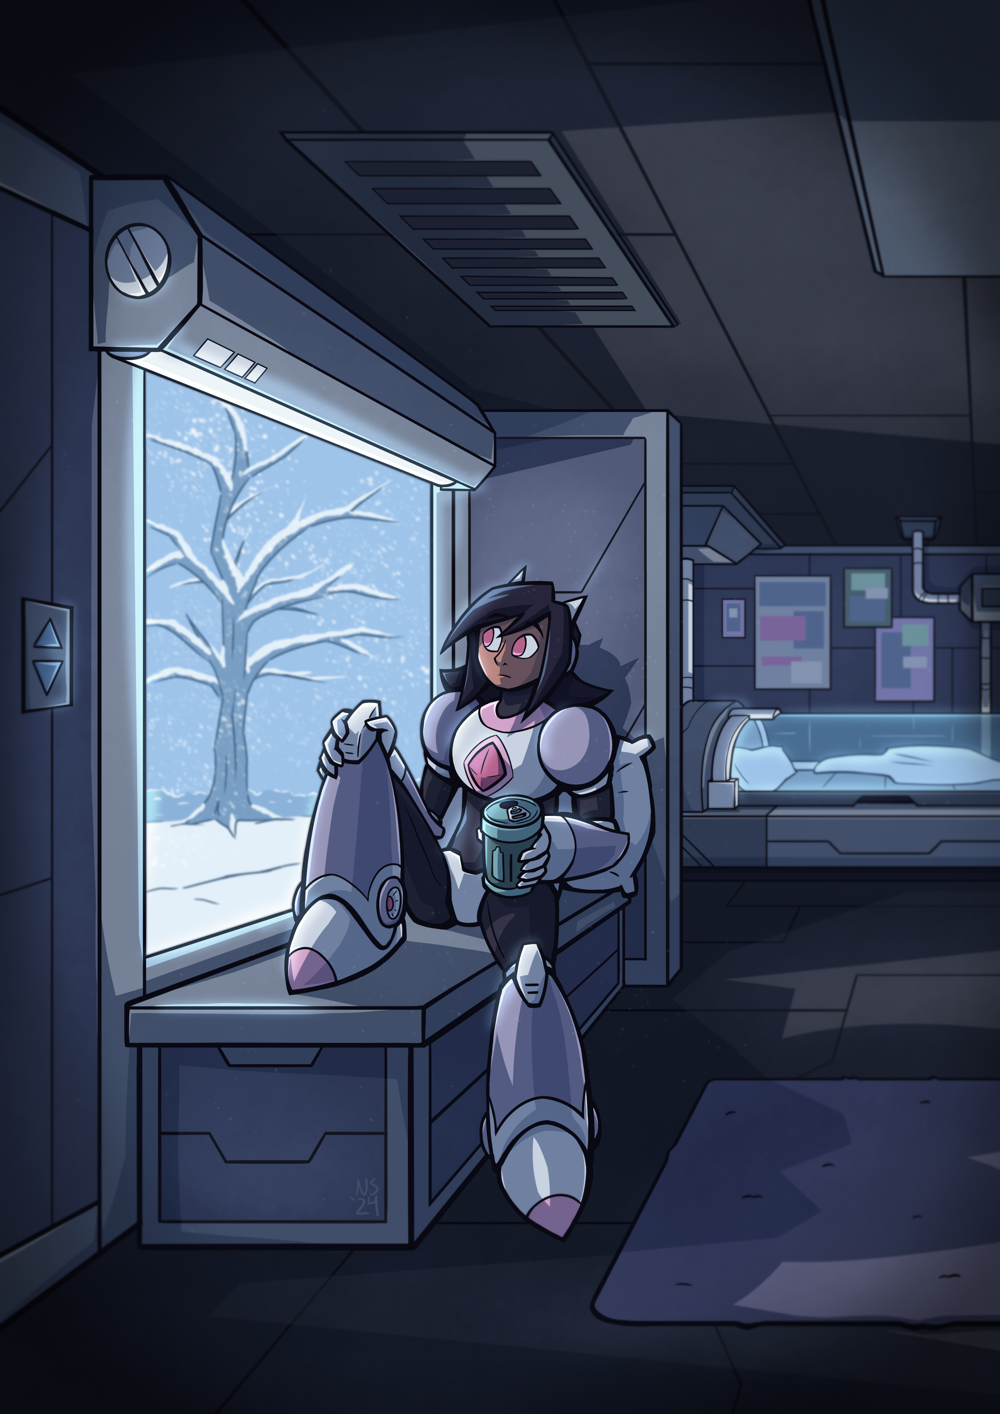 Io in their apartment watching the snowfall outside the window.